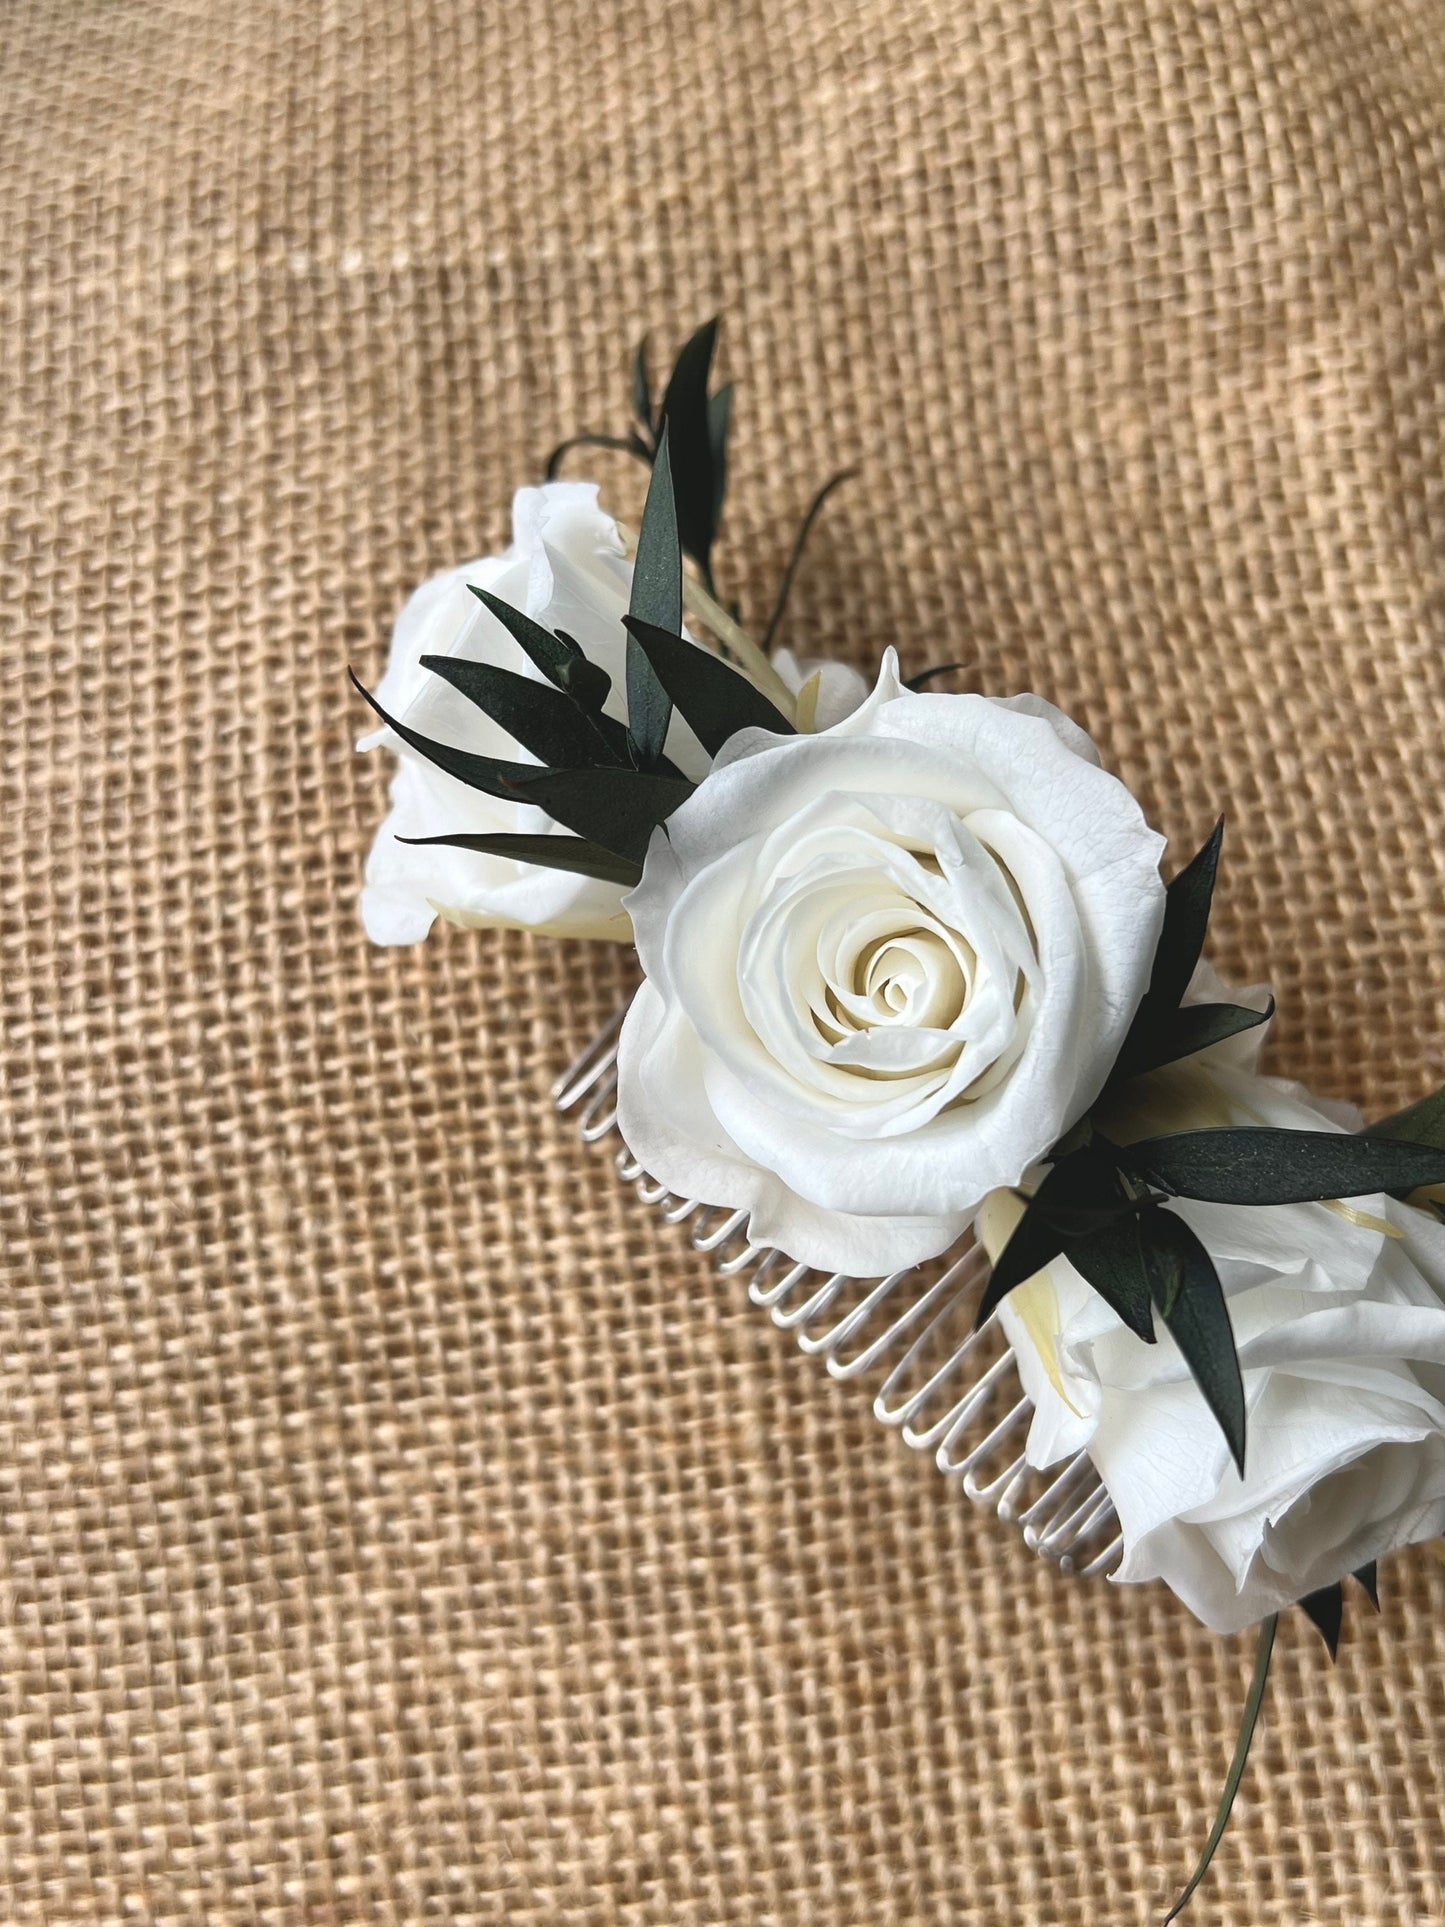 Boho White Rose And Eucalyptus Wedding Hair Comb, White and Green Olive Leaves Flower Comb, Rustic Bridal Wedding Accessories Silver Gold UK